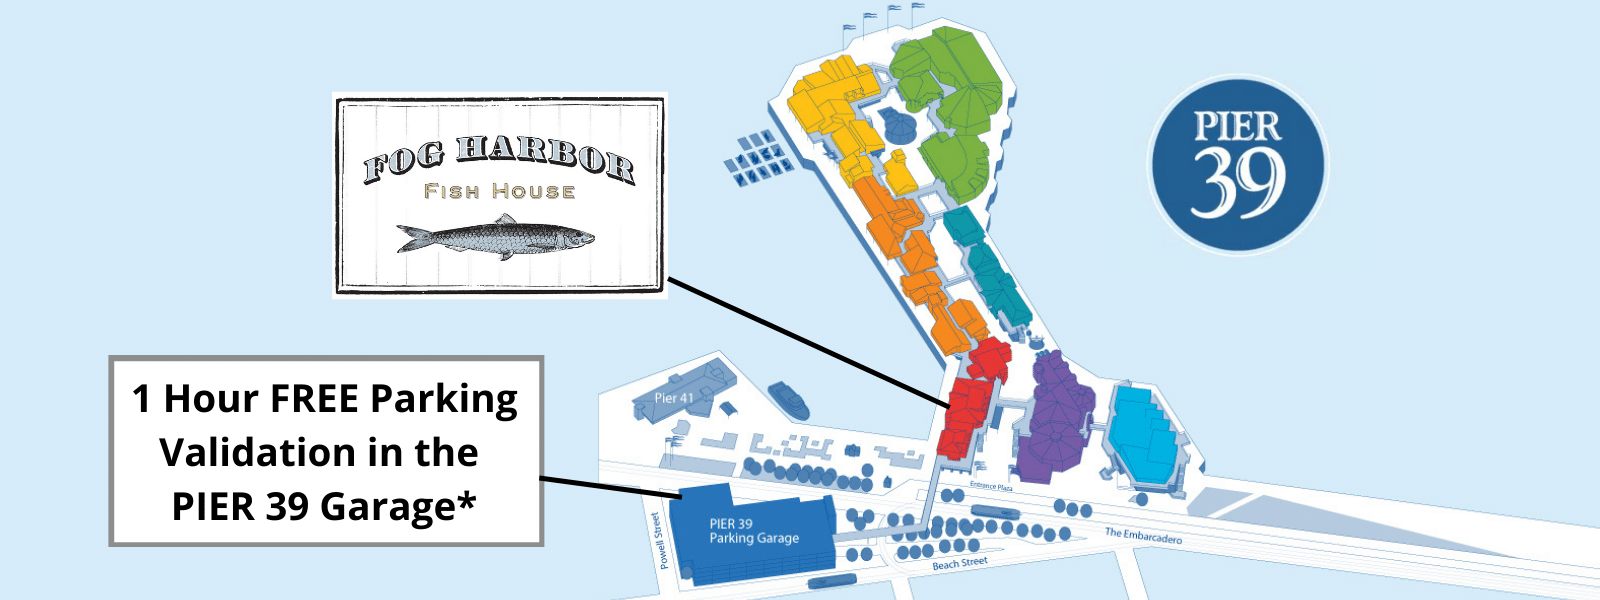 Map of pier 39 with fog harbor fish house